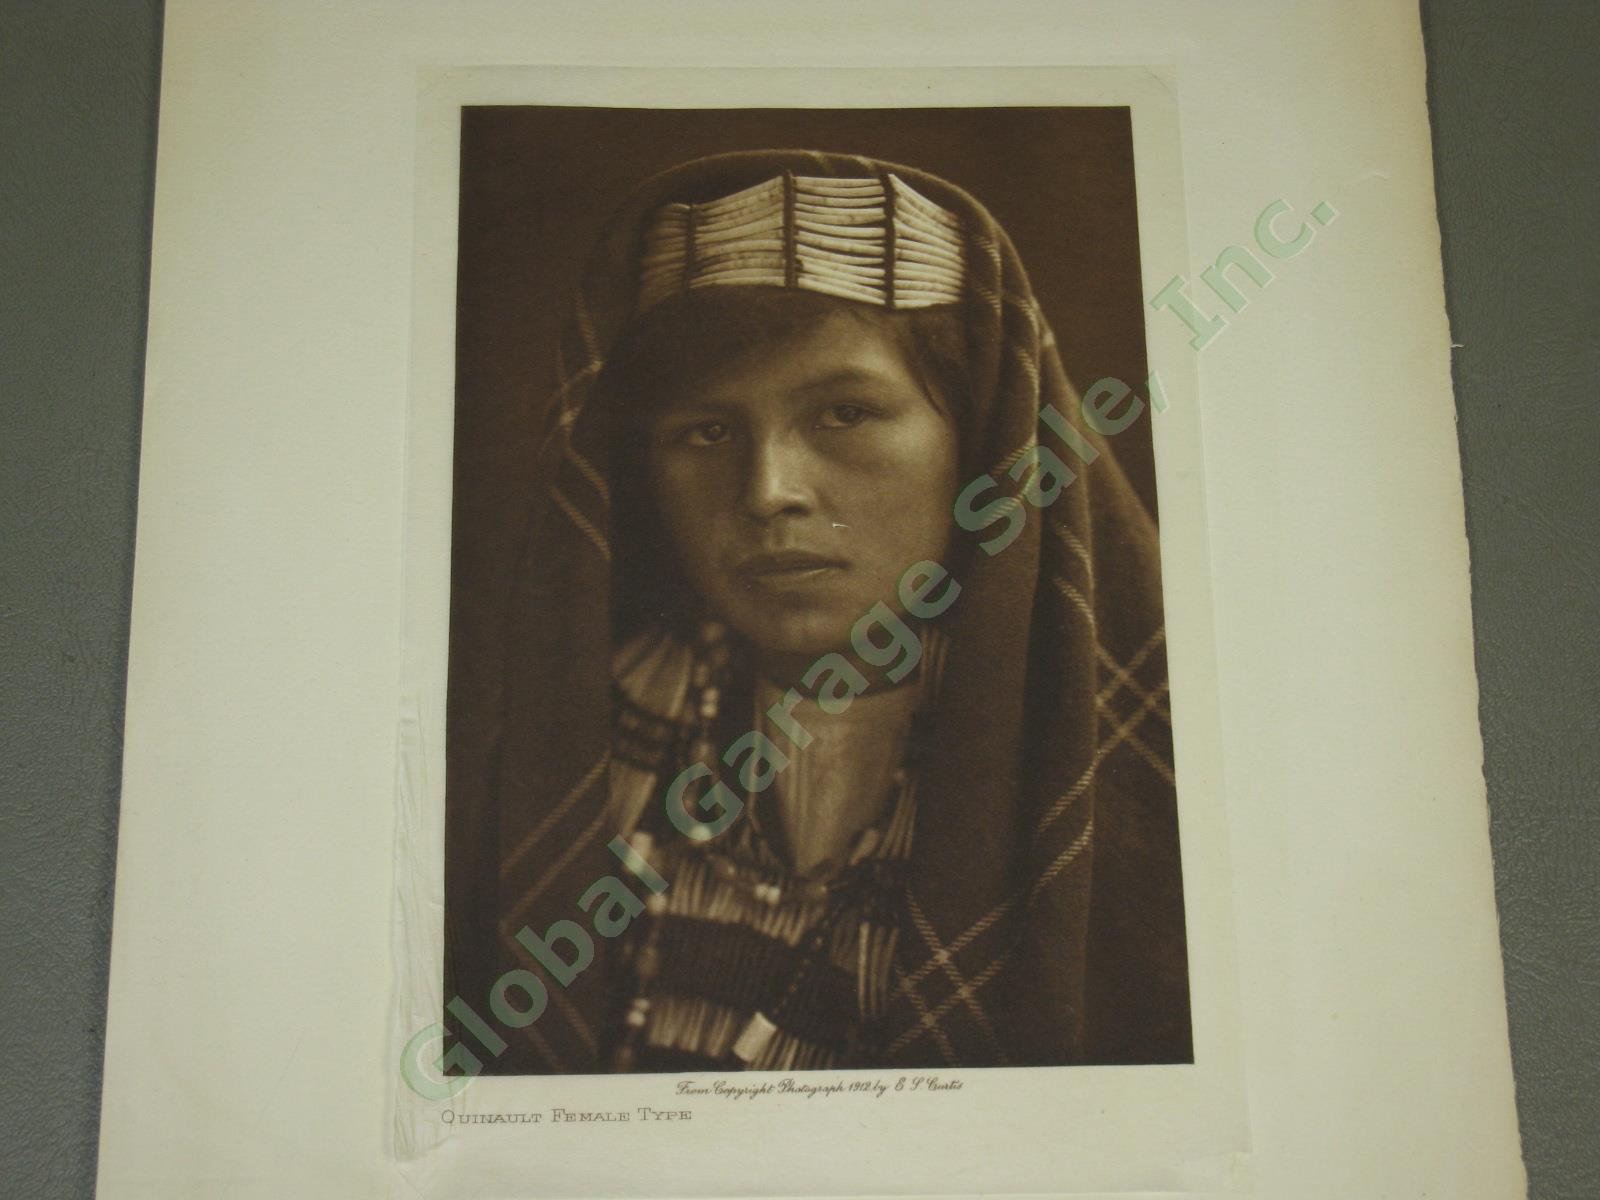 1912 Edward Curtis Photo On Japanese Tissue Quinault Female Type Native American 1